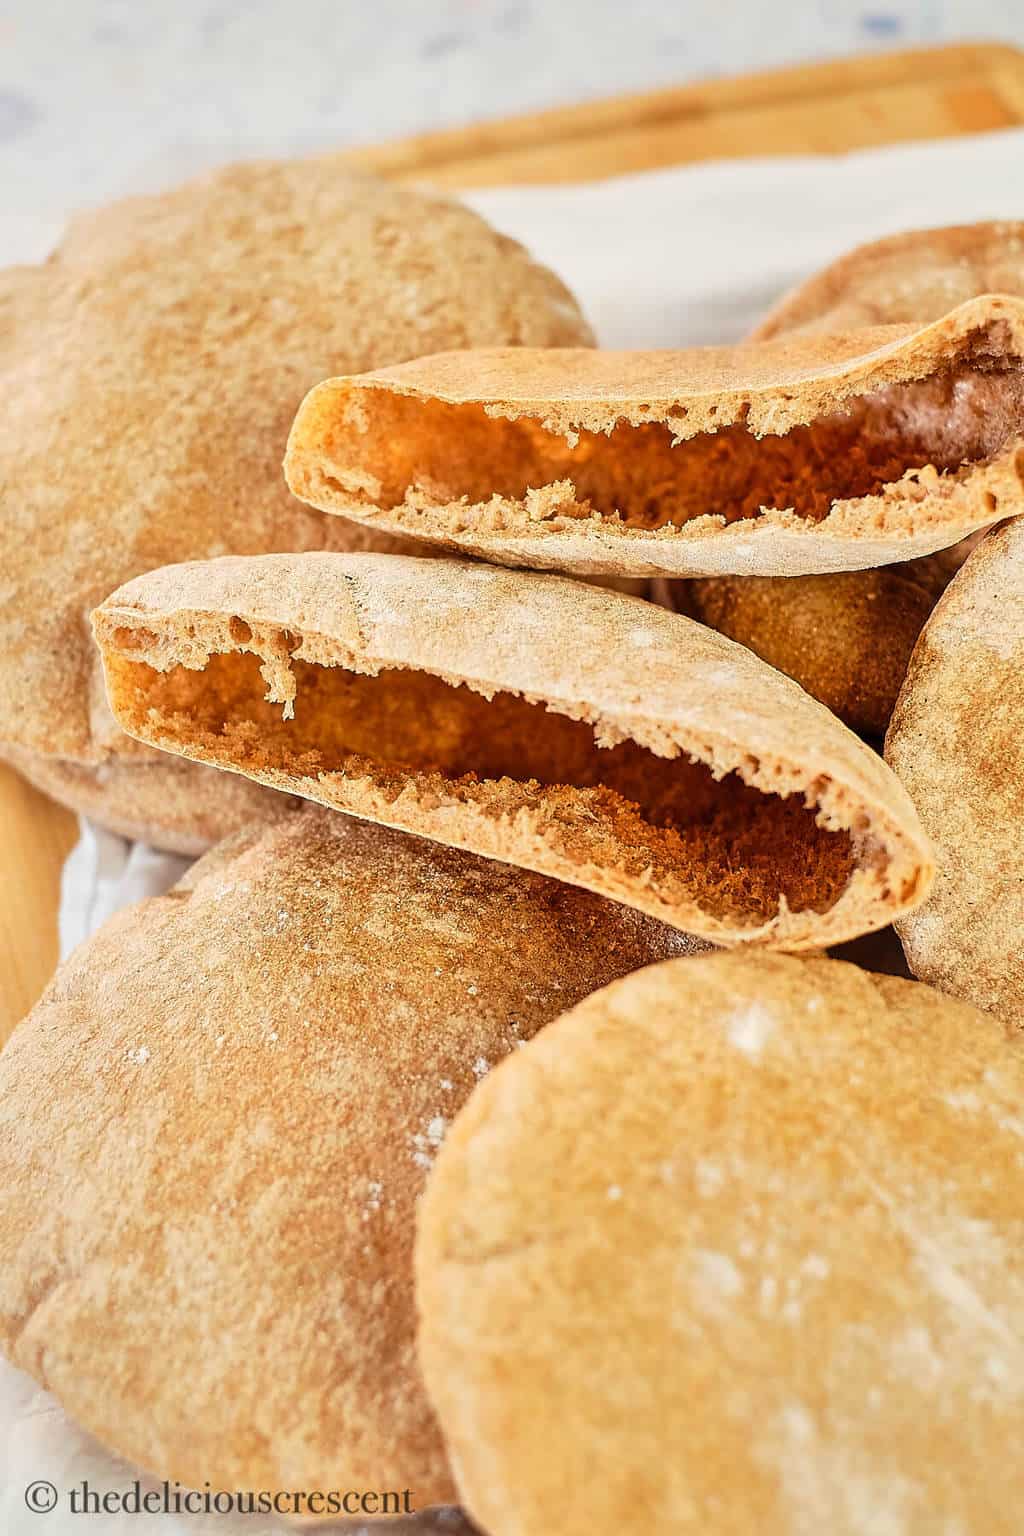 Whole wheat pita bread halves placed among a stack of breads.